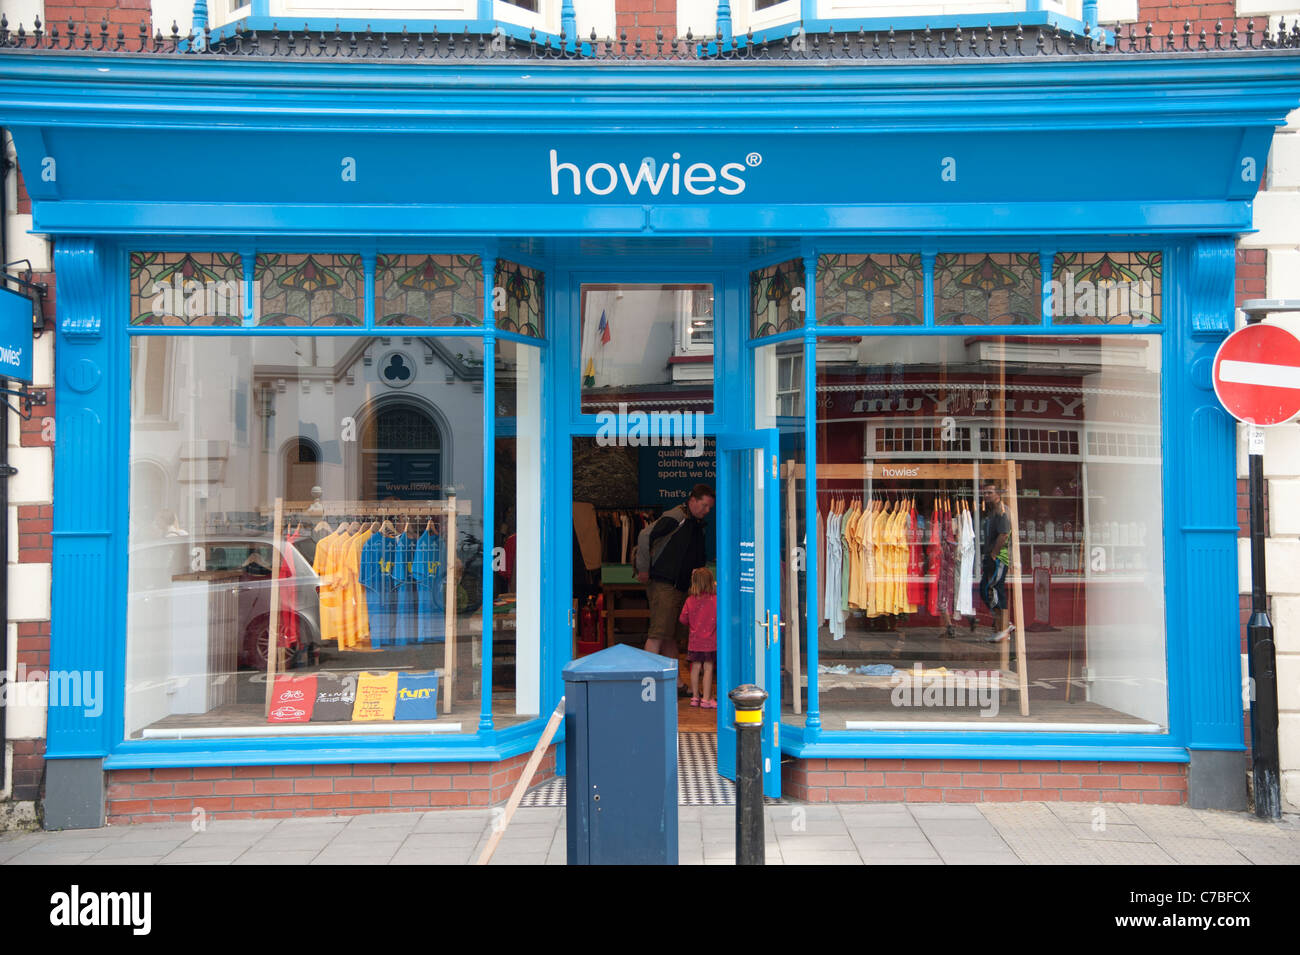 Howies clothes shop retail outlet , Cardigan Wales UK Stock Photo - Alamy